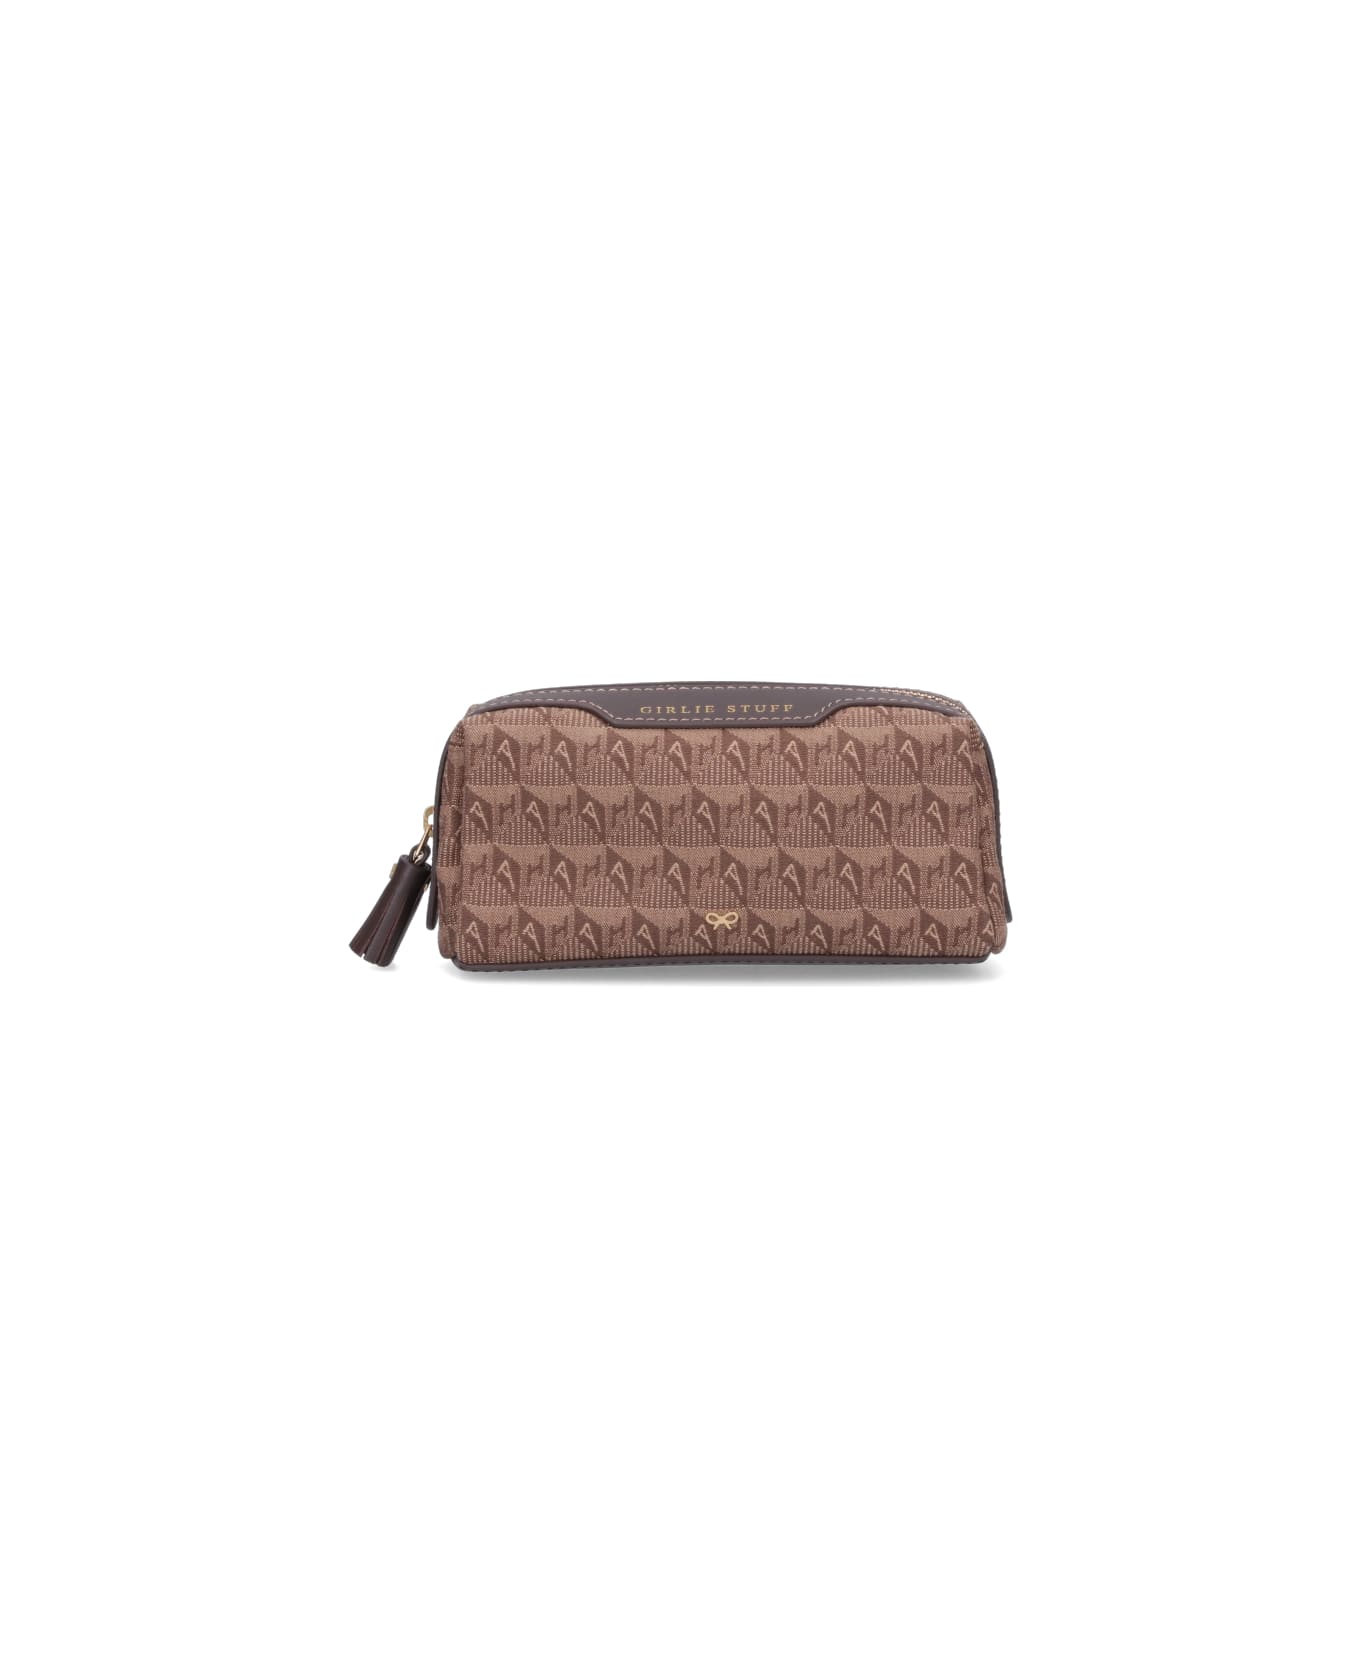 Anya Hindmarch Pouch "girlie Stuff" - Brown クラッチバッグ